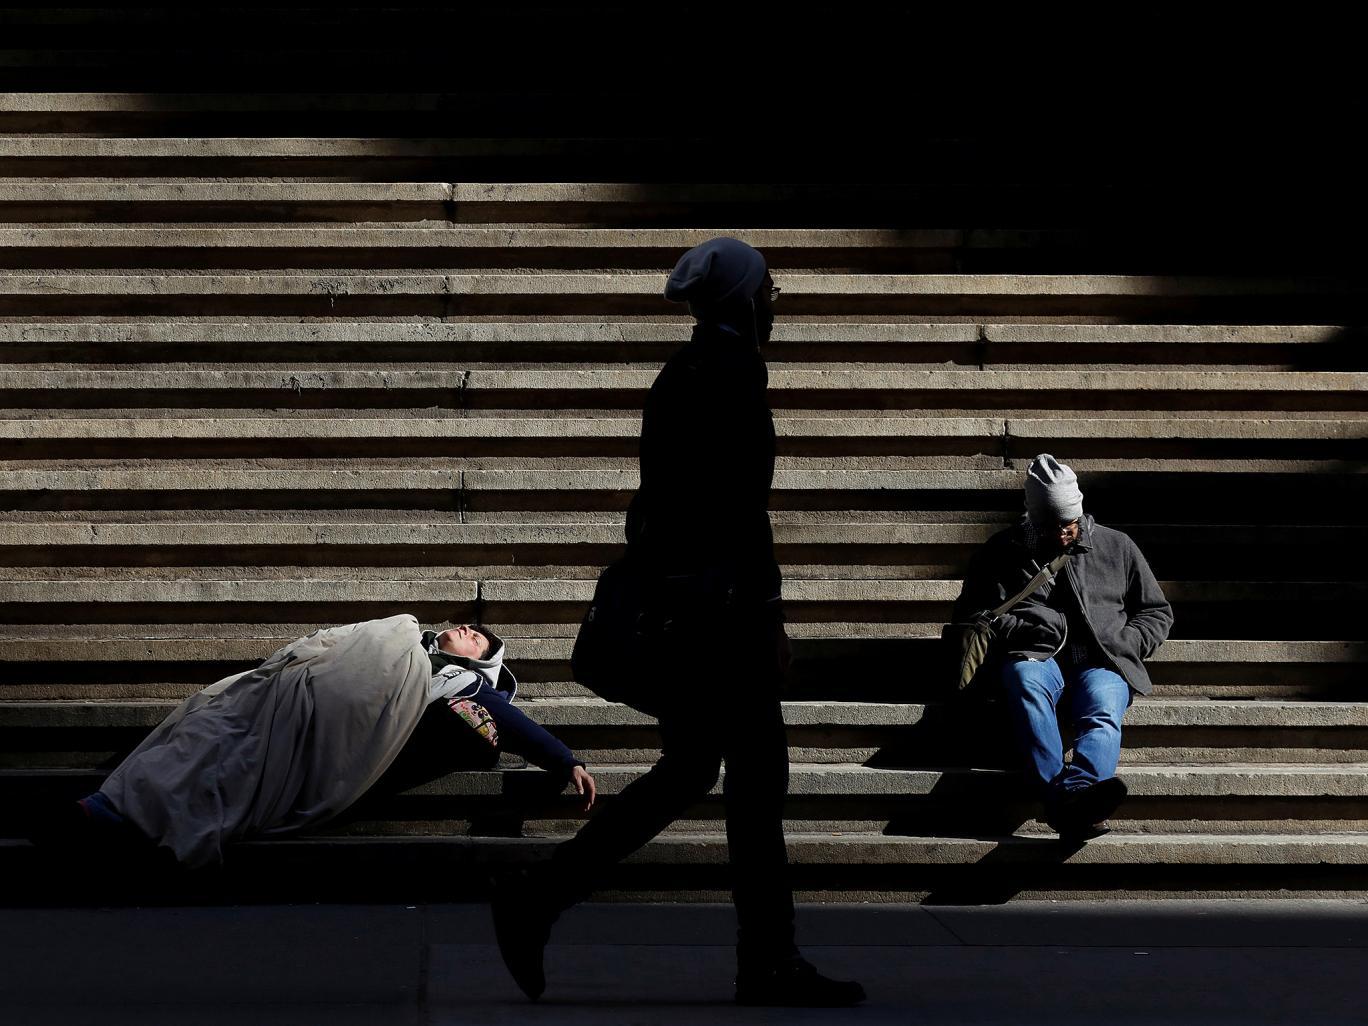 Rough sleeping has increased by 169 per cent since the Tories came to power in 2010